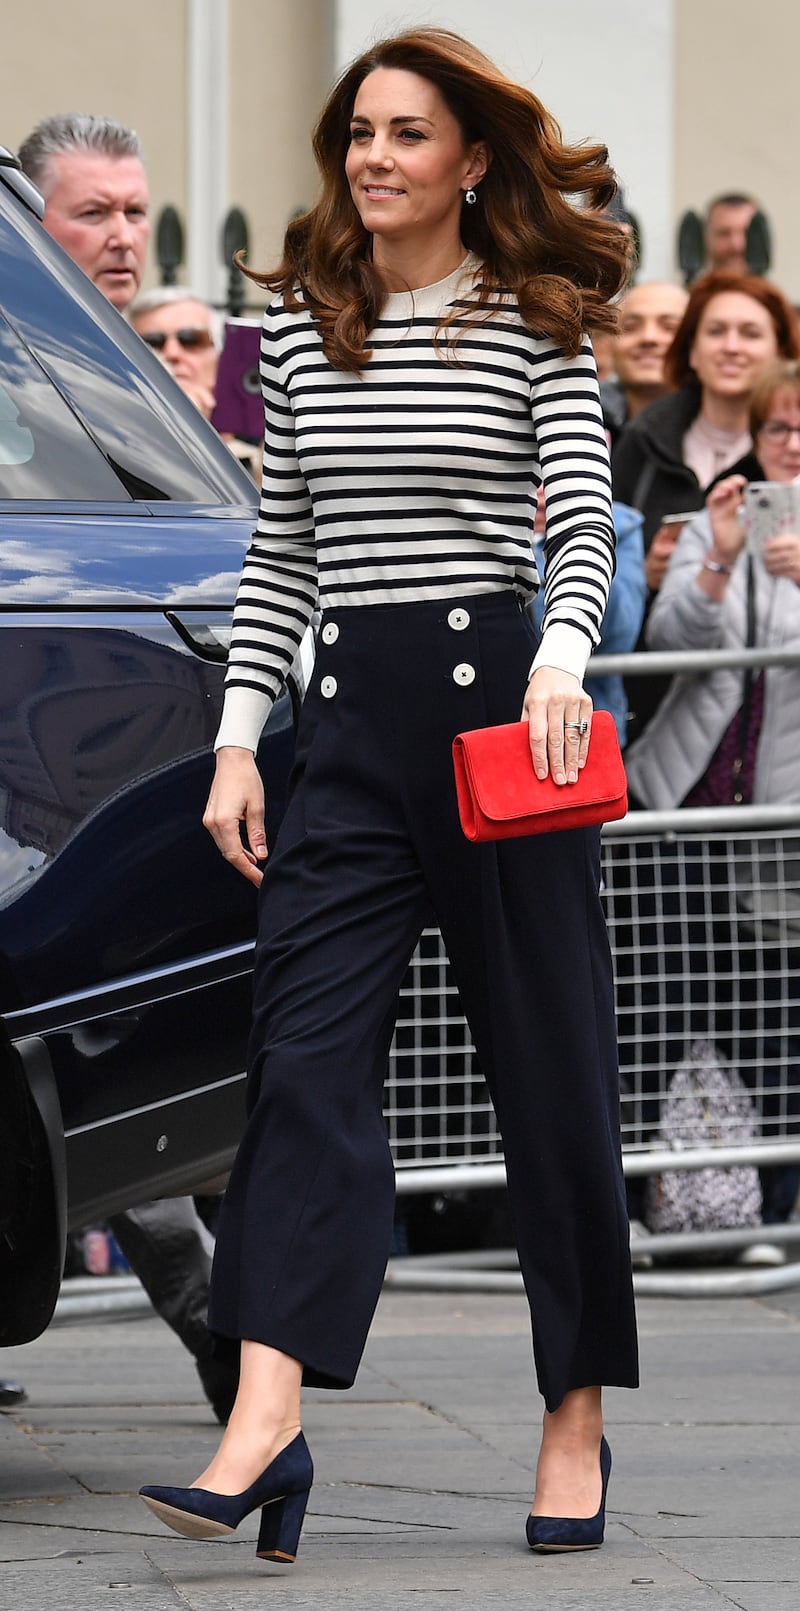 Catherine, Duchess of Cambridge, in nautical stripes and LK Bennett trousers, attends the King's Cup Regatta at Greenwich on May 7, 2019 in London, England. Getty Images